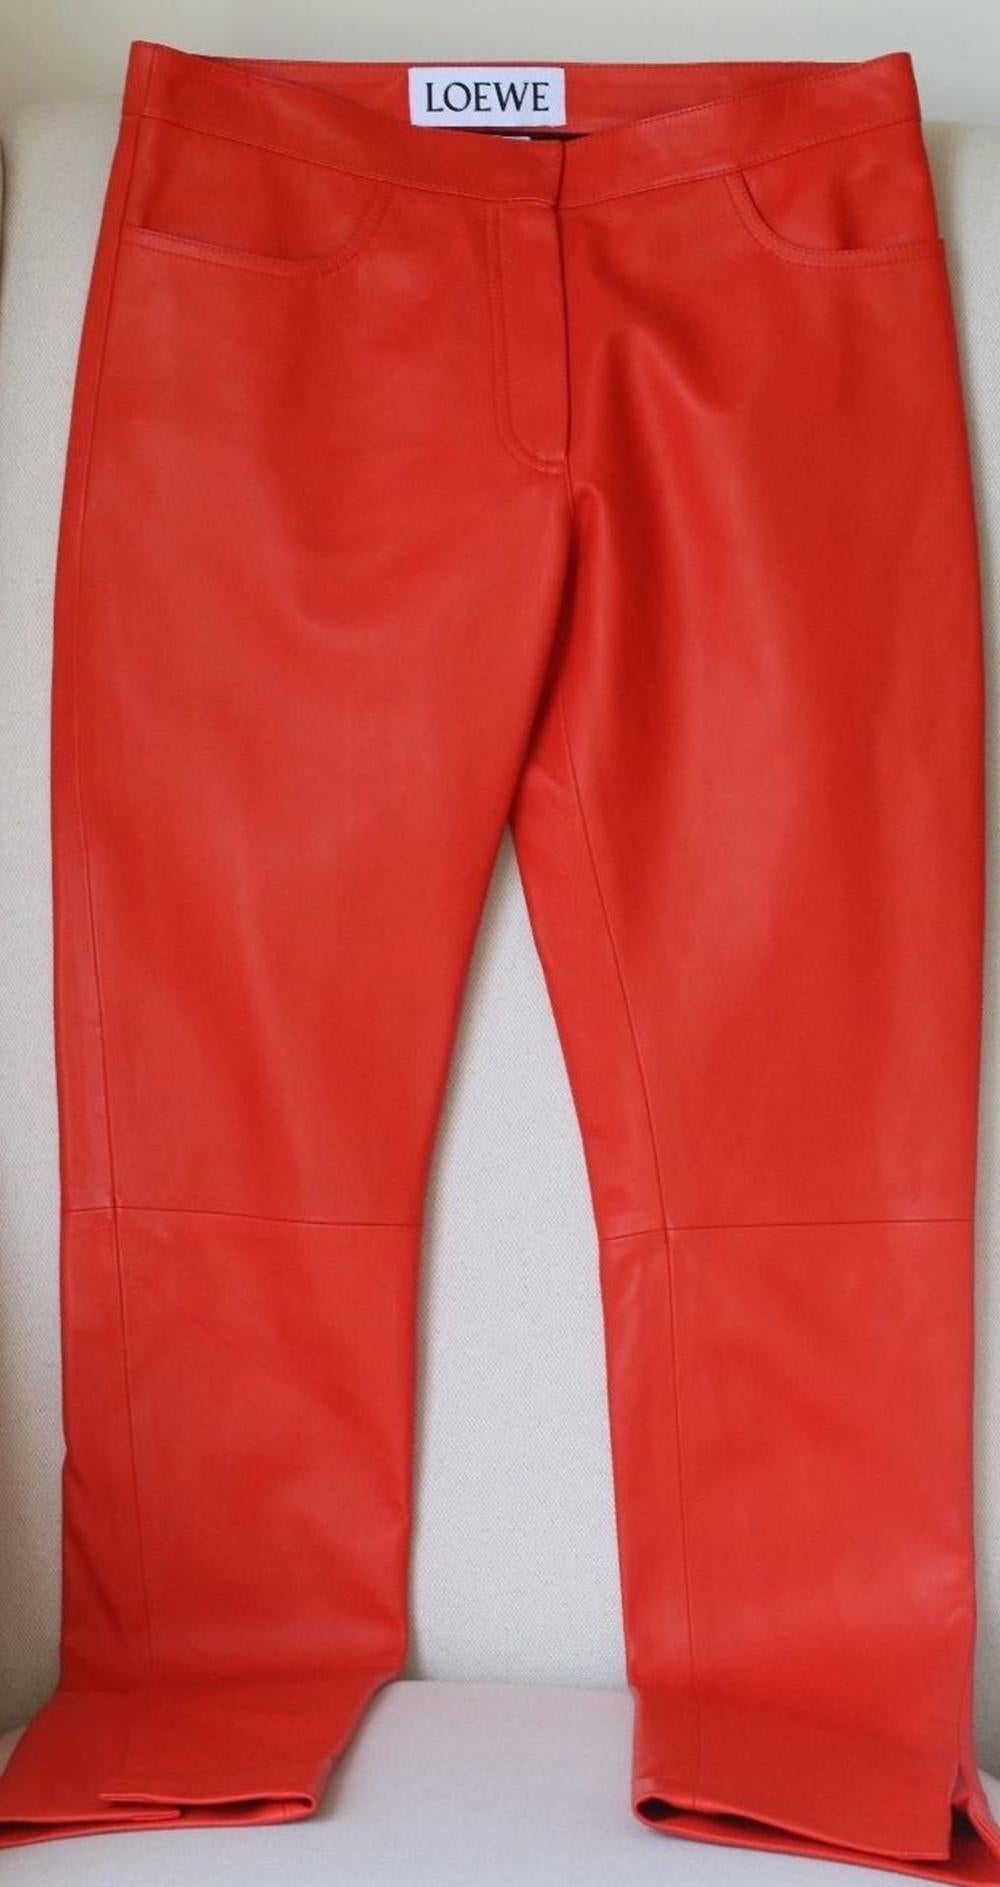 These red Loewe trousers are are a veritably stand-out piece from the brand's new season collection (thank you Jonathan). Crafted in Spain from sumptuous leather, the trousers have been designed in a vibrant red hue. 100% Lambskin leather.

Size: FR